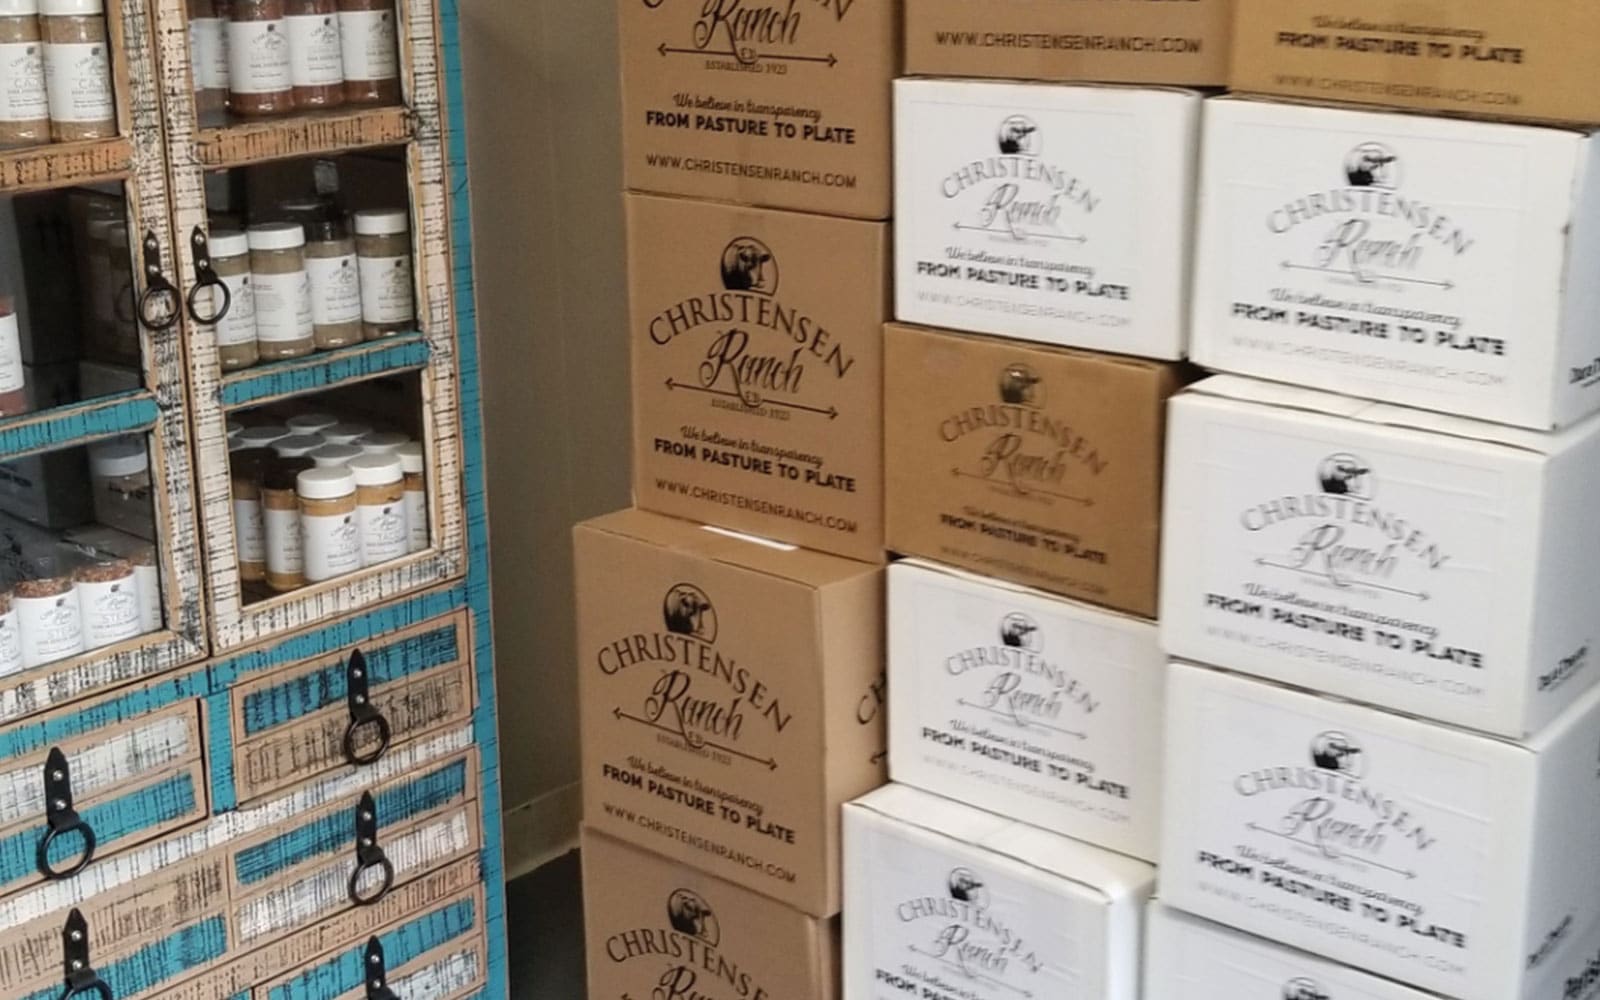 Boxes of Christensen Ranch beef ready to ship across the country